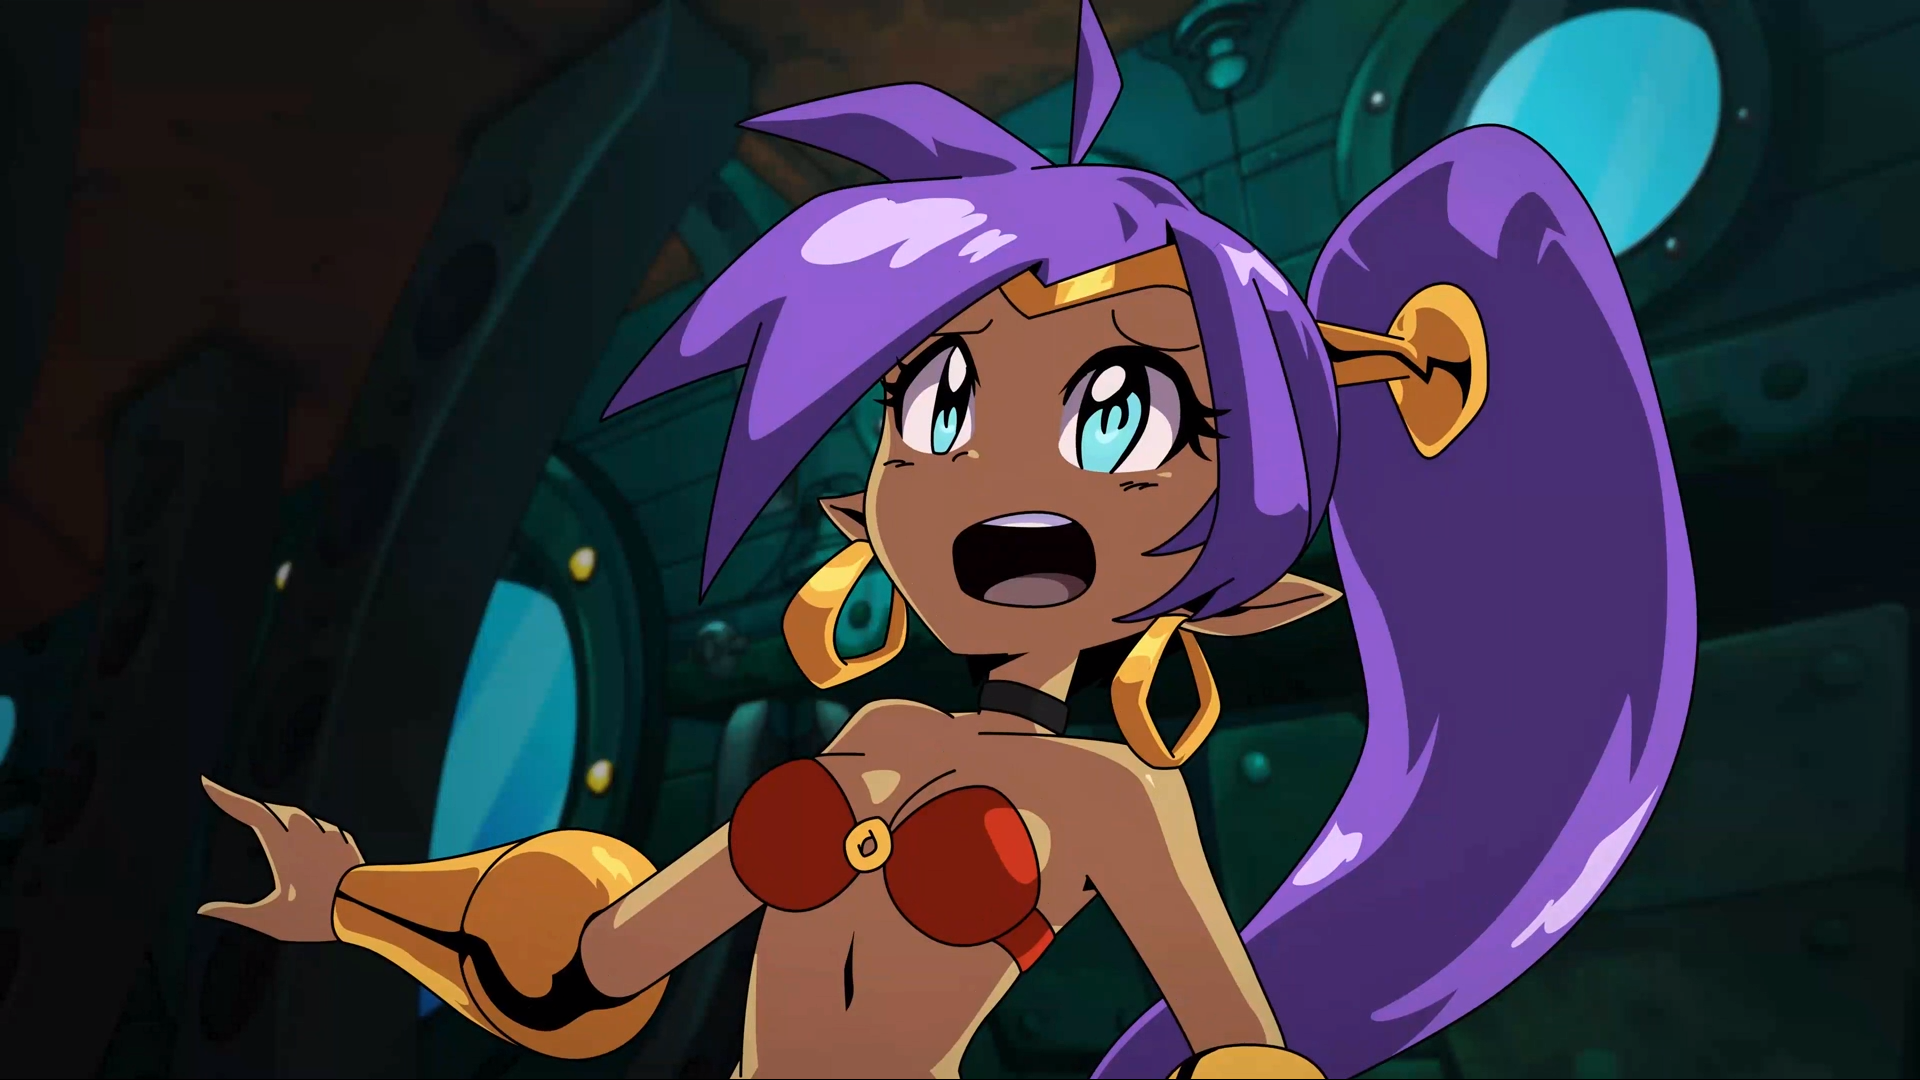 PR - WayForward Announces New Details and Release Date for Shantae and the Seven Sirens